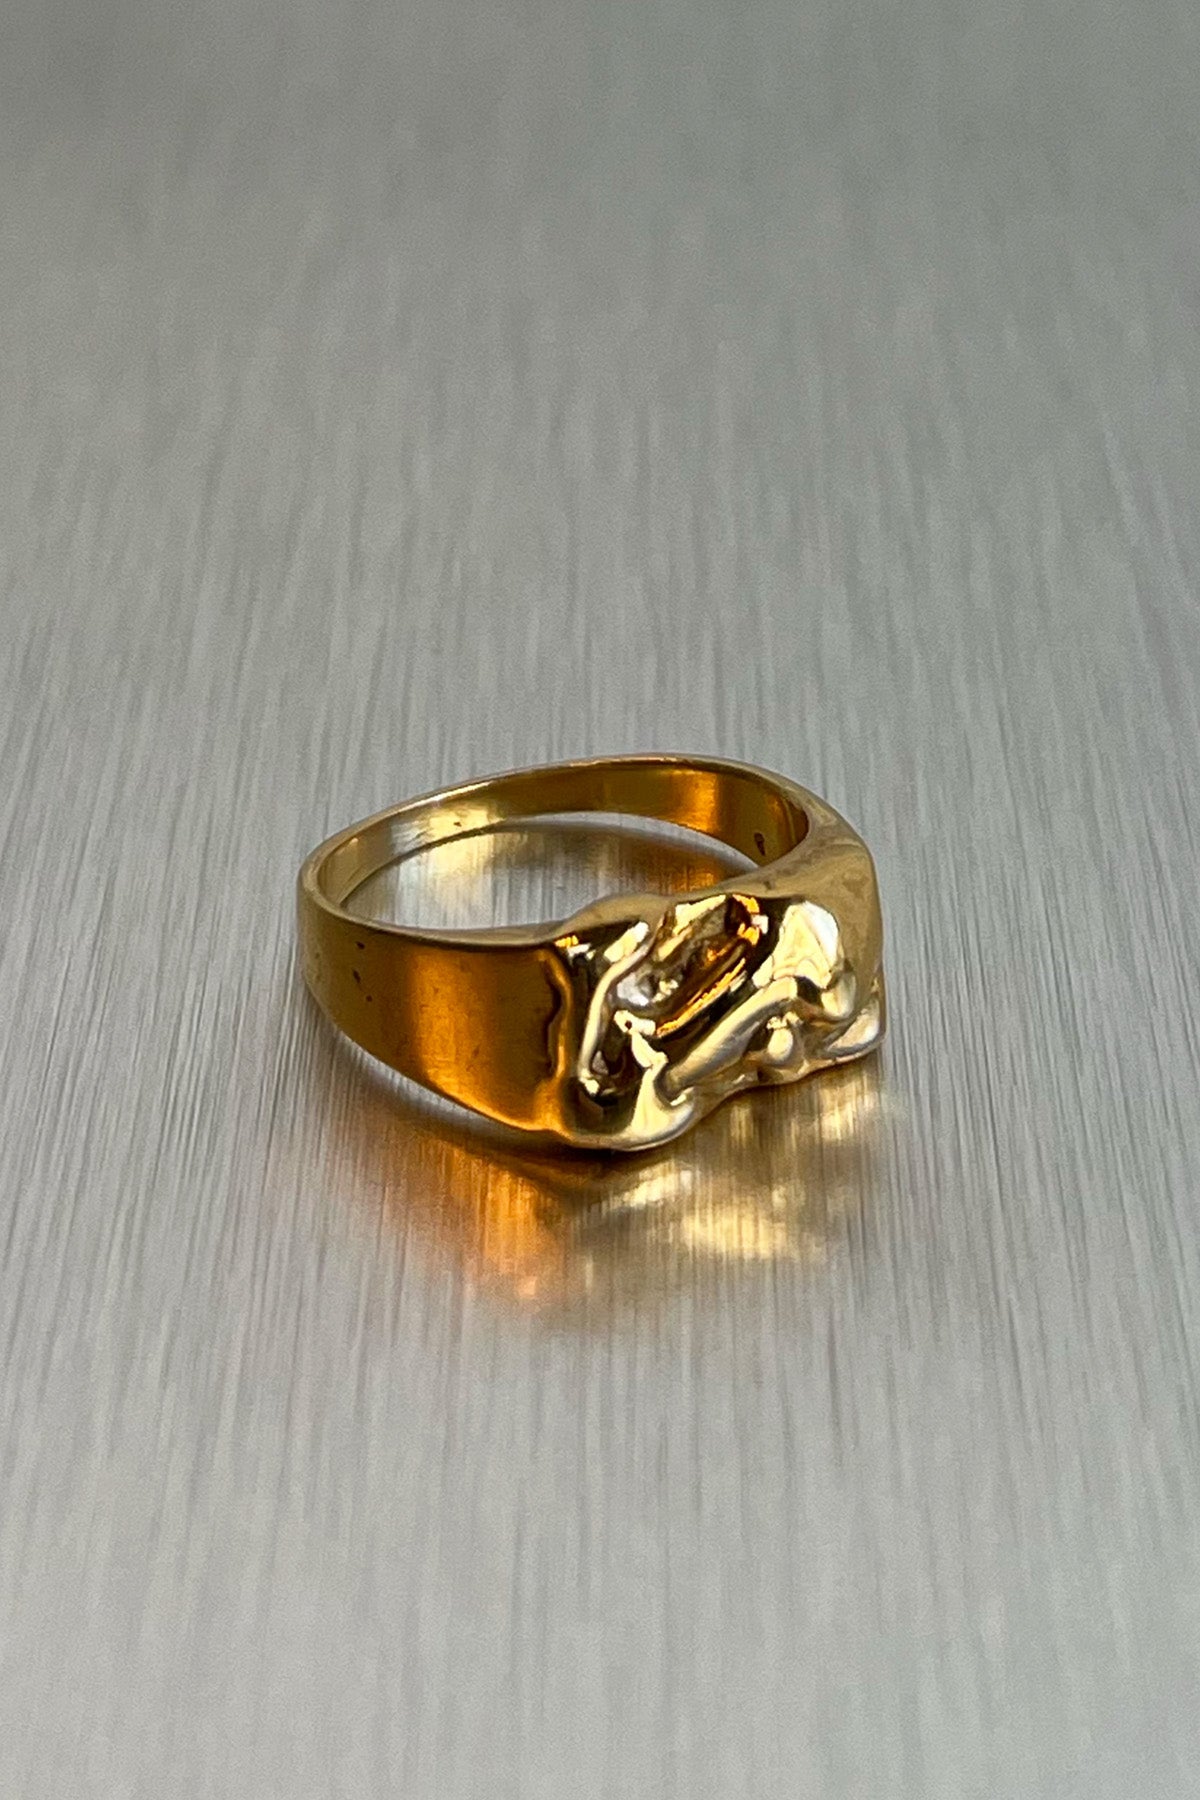 Gold imperfect ring